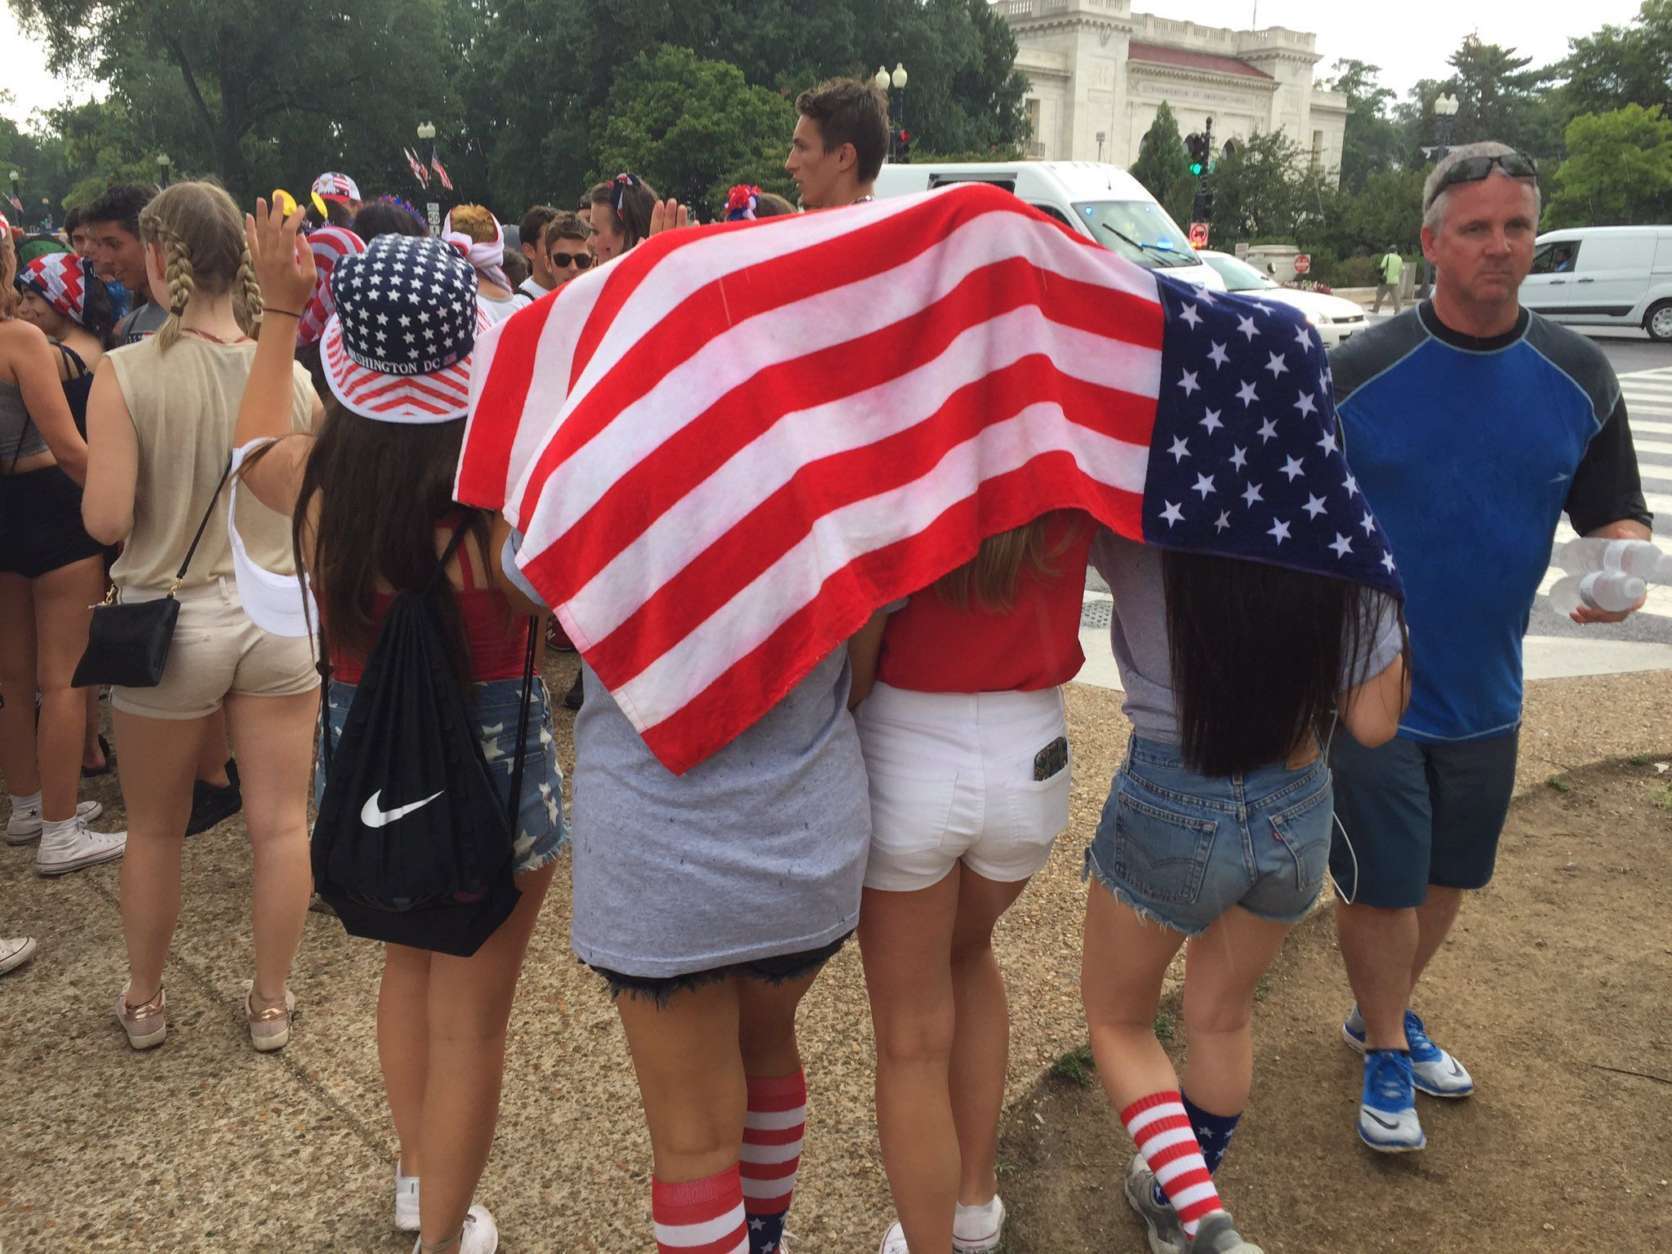 Some spectators used Old Glory to stay dry during some surprise showers. (WTOP/Michelle Basch)